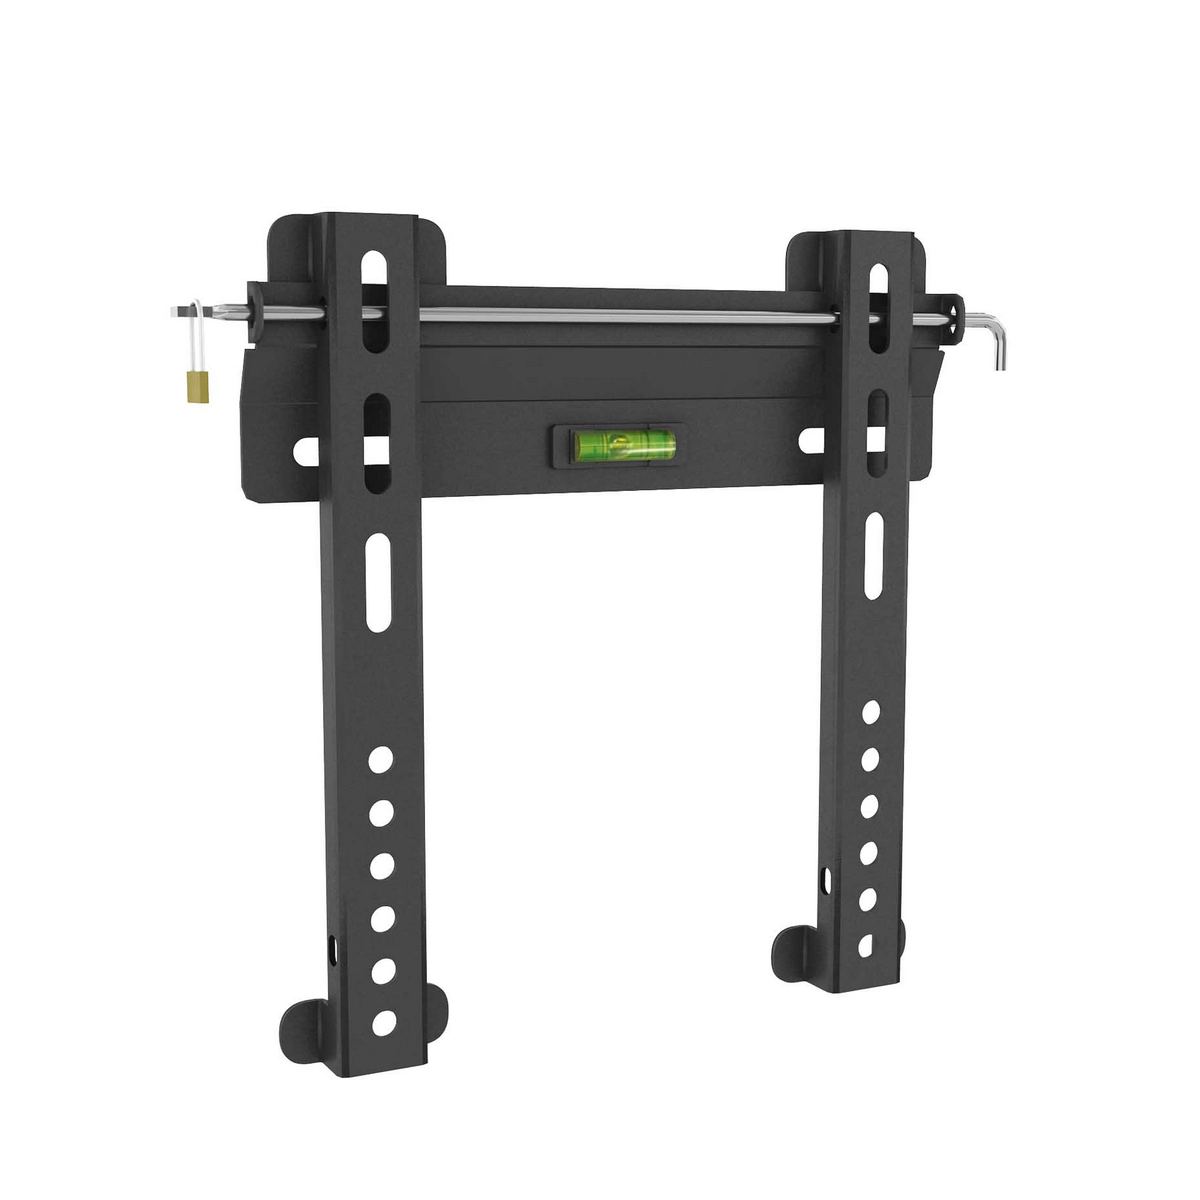 Corliving Pm-6500 Fixed Low Profile Wall Mount For 18" - 32" Tvs